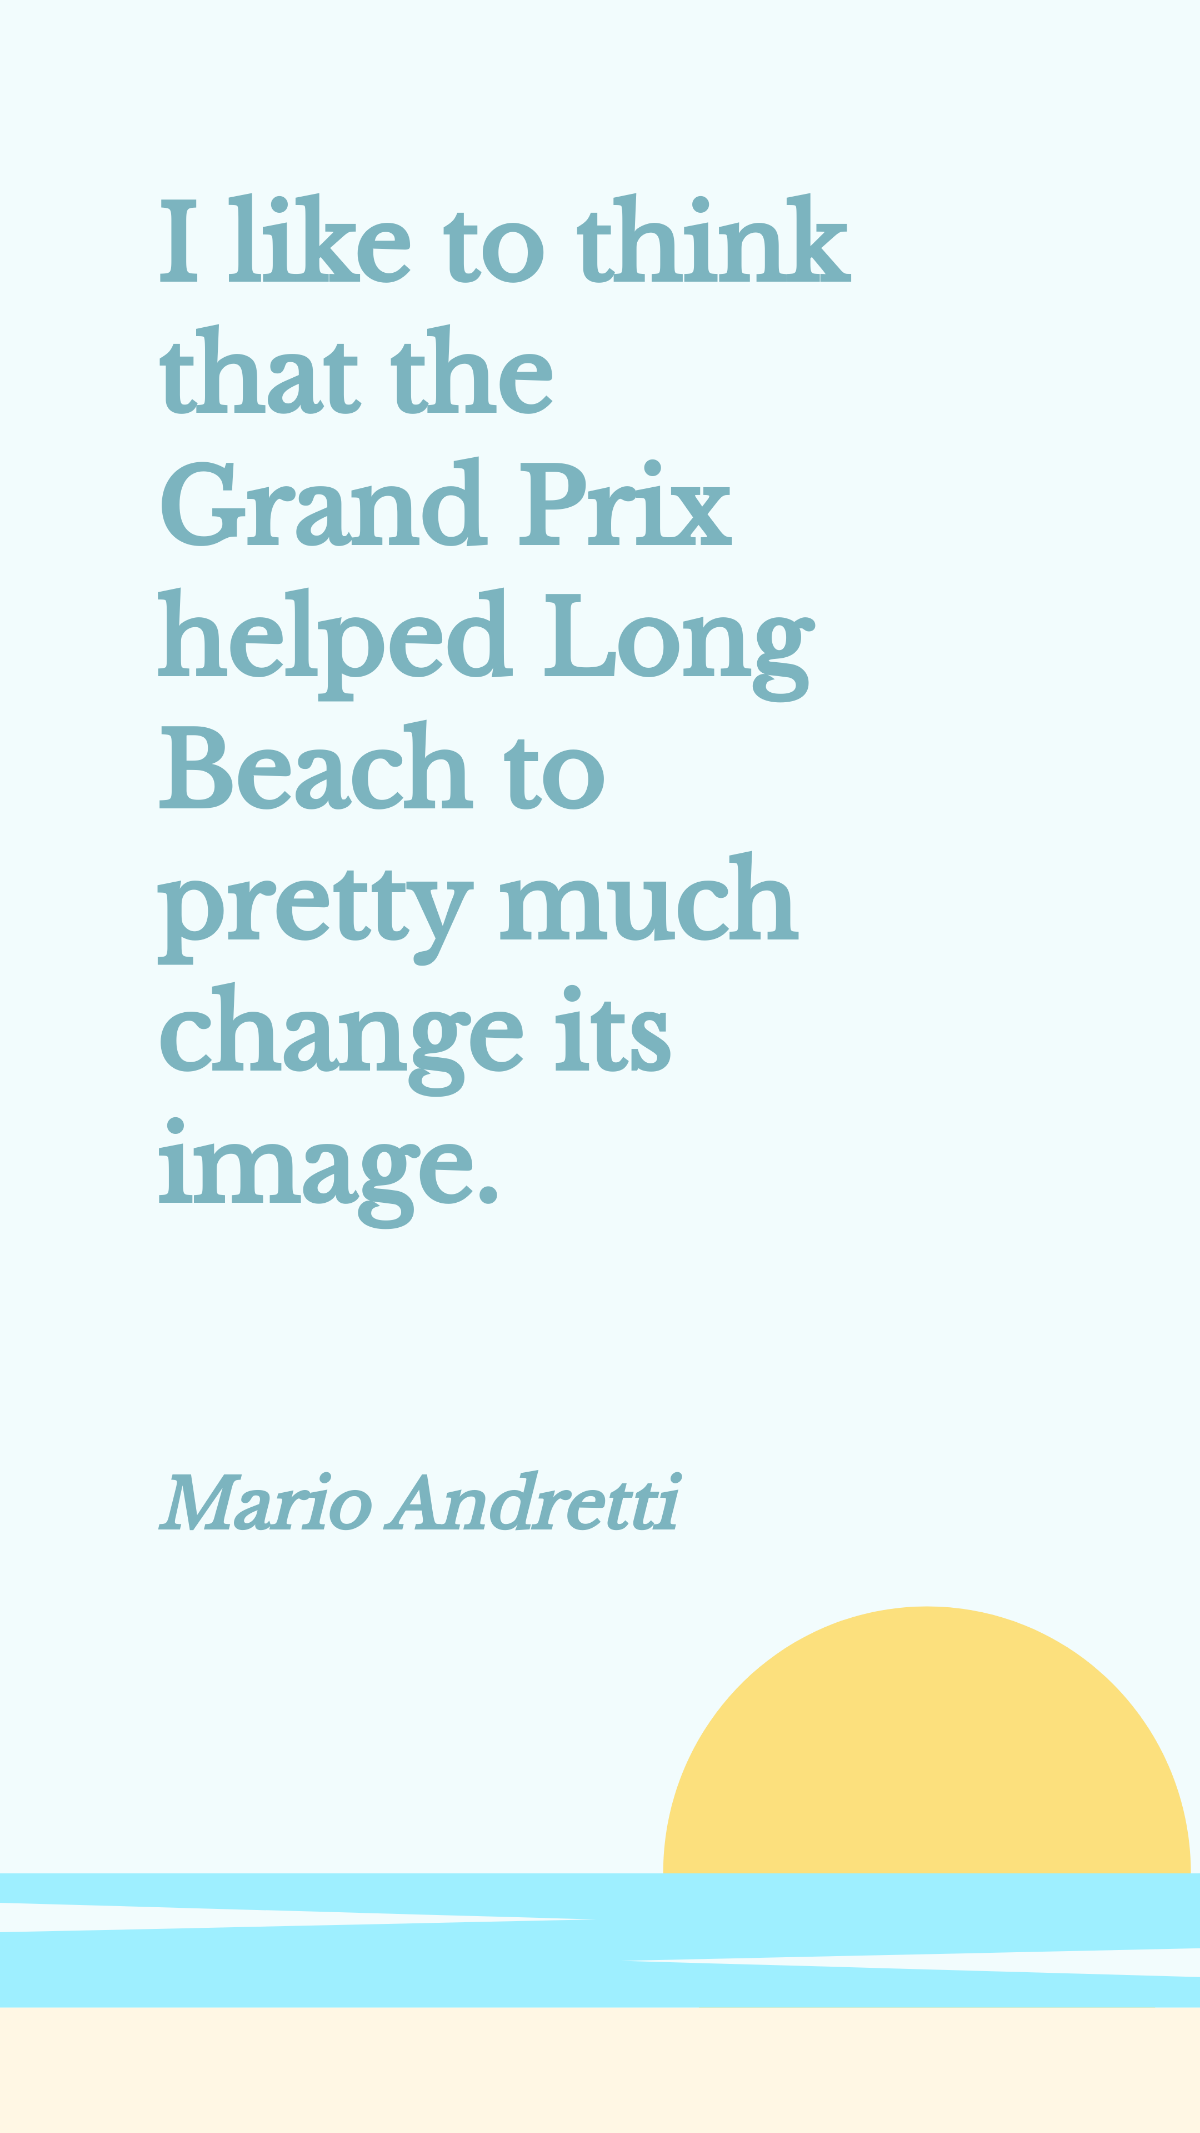 Mario Andretti - I like to think that the Grand Prix helped Long Beach to pretty much change its image. Template